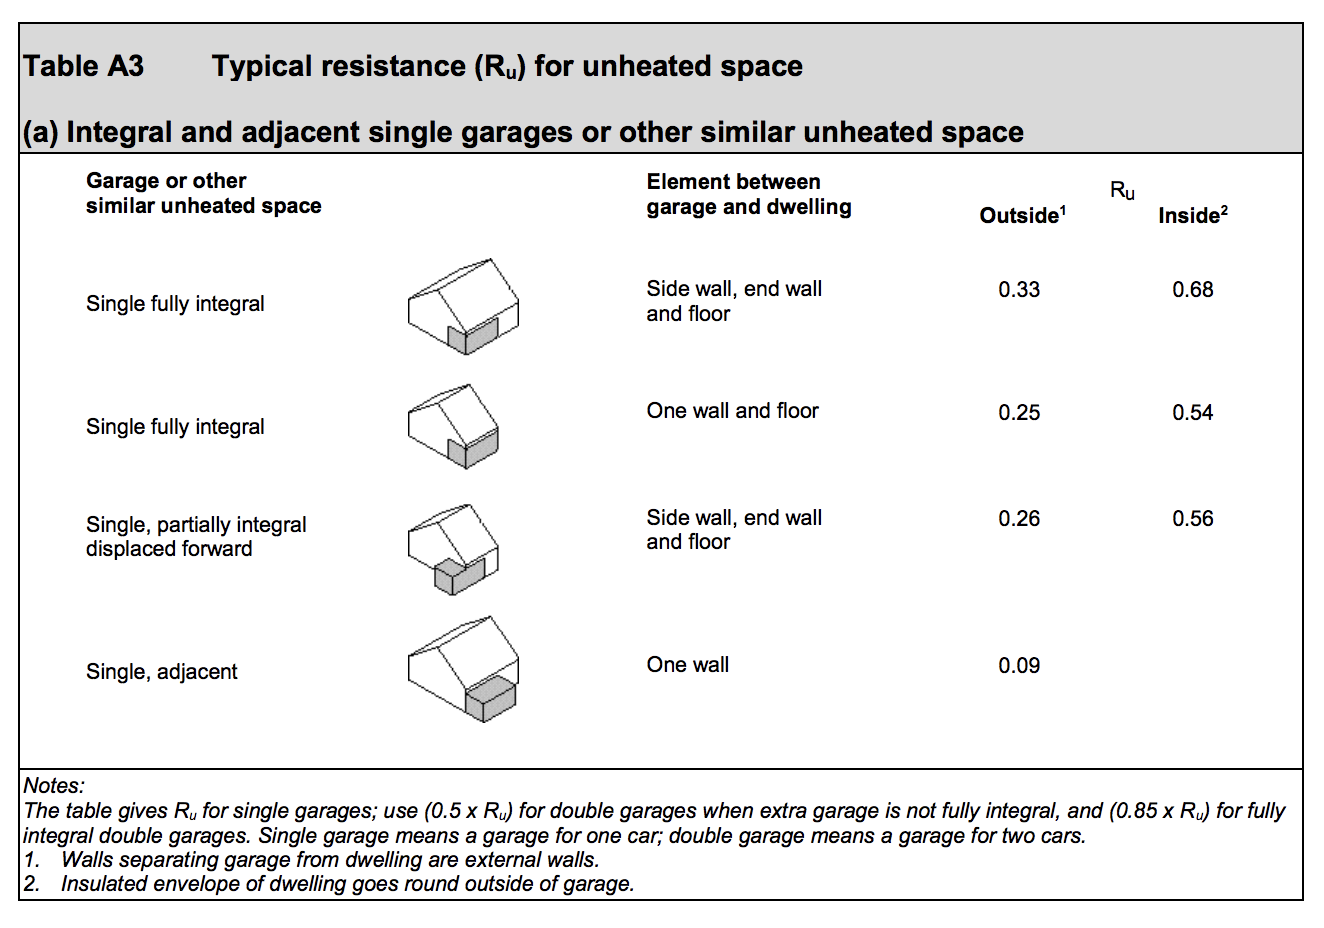 Table HL10 - Typical resistance (Rᵤ) for unheated space (a) integral and adjacent single garages or other similar unheated space - Extract from TGD L